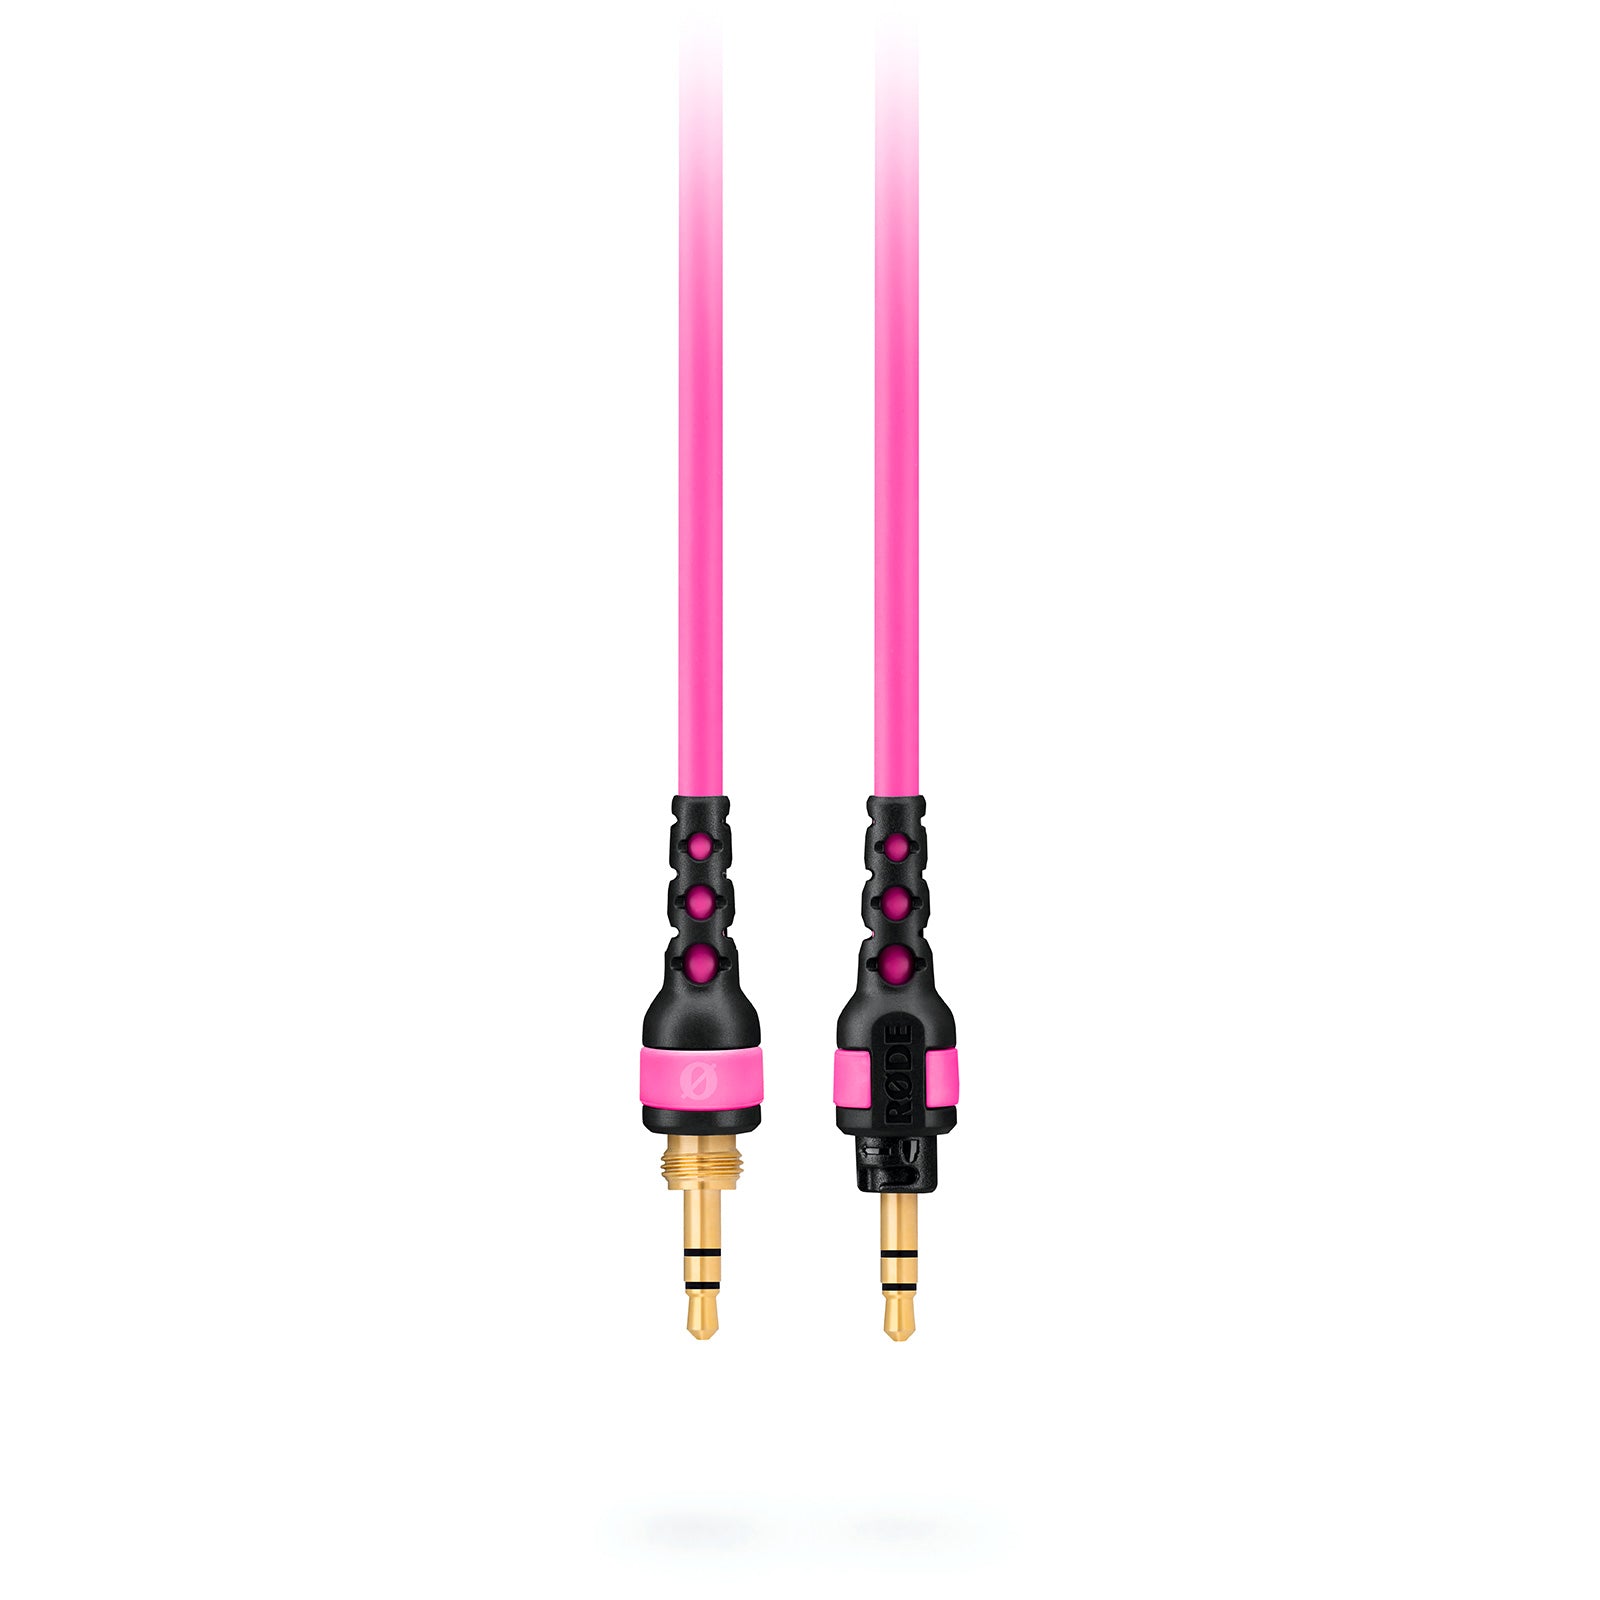 RODE(ロード) NTH-ケーブル12 Pink(ピンク) NTH-CABLE12P